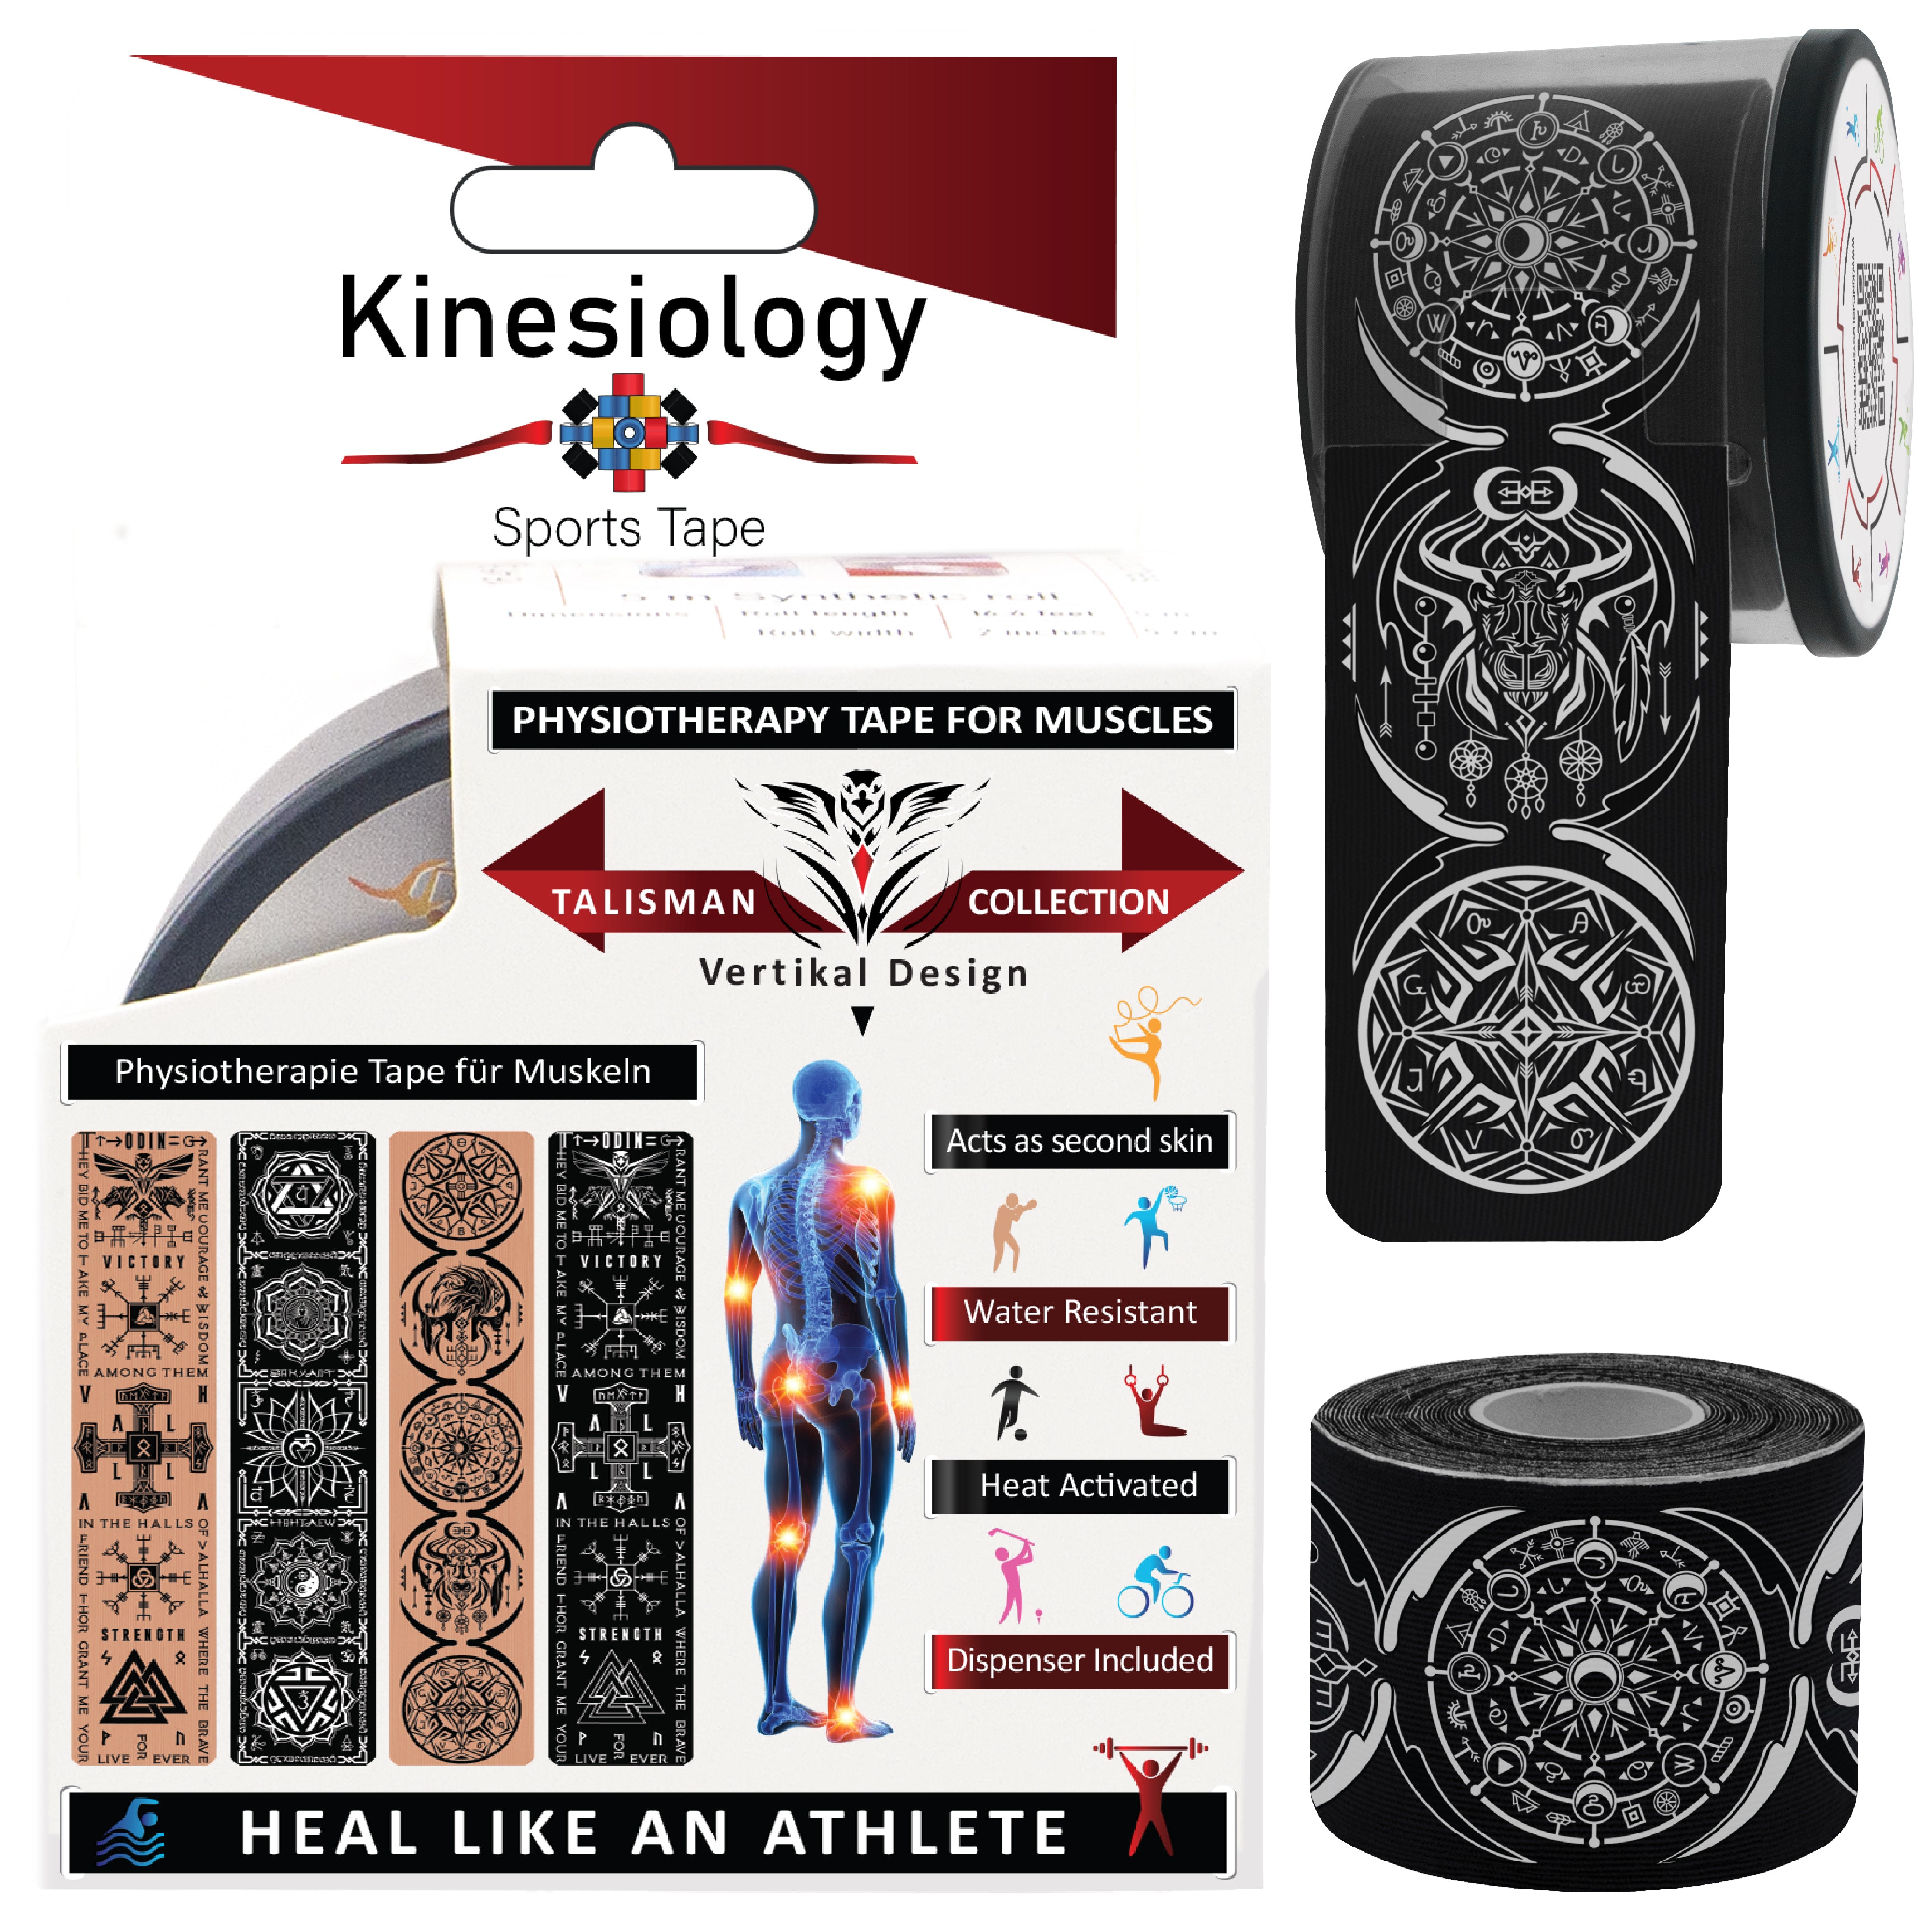 Black Kinesiology Tape Pre Cut with Dispenser - Talisman - Dreamcatcher - Vertical Design - Athletic Sports Tape - For Healing and Recovery